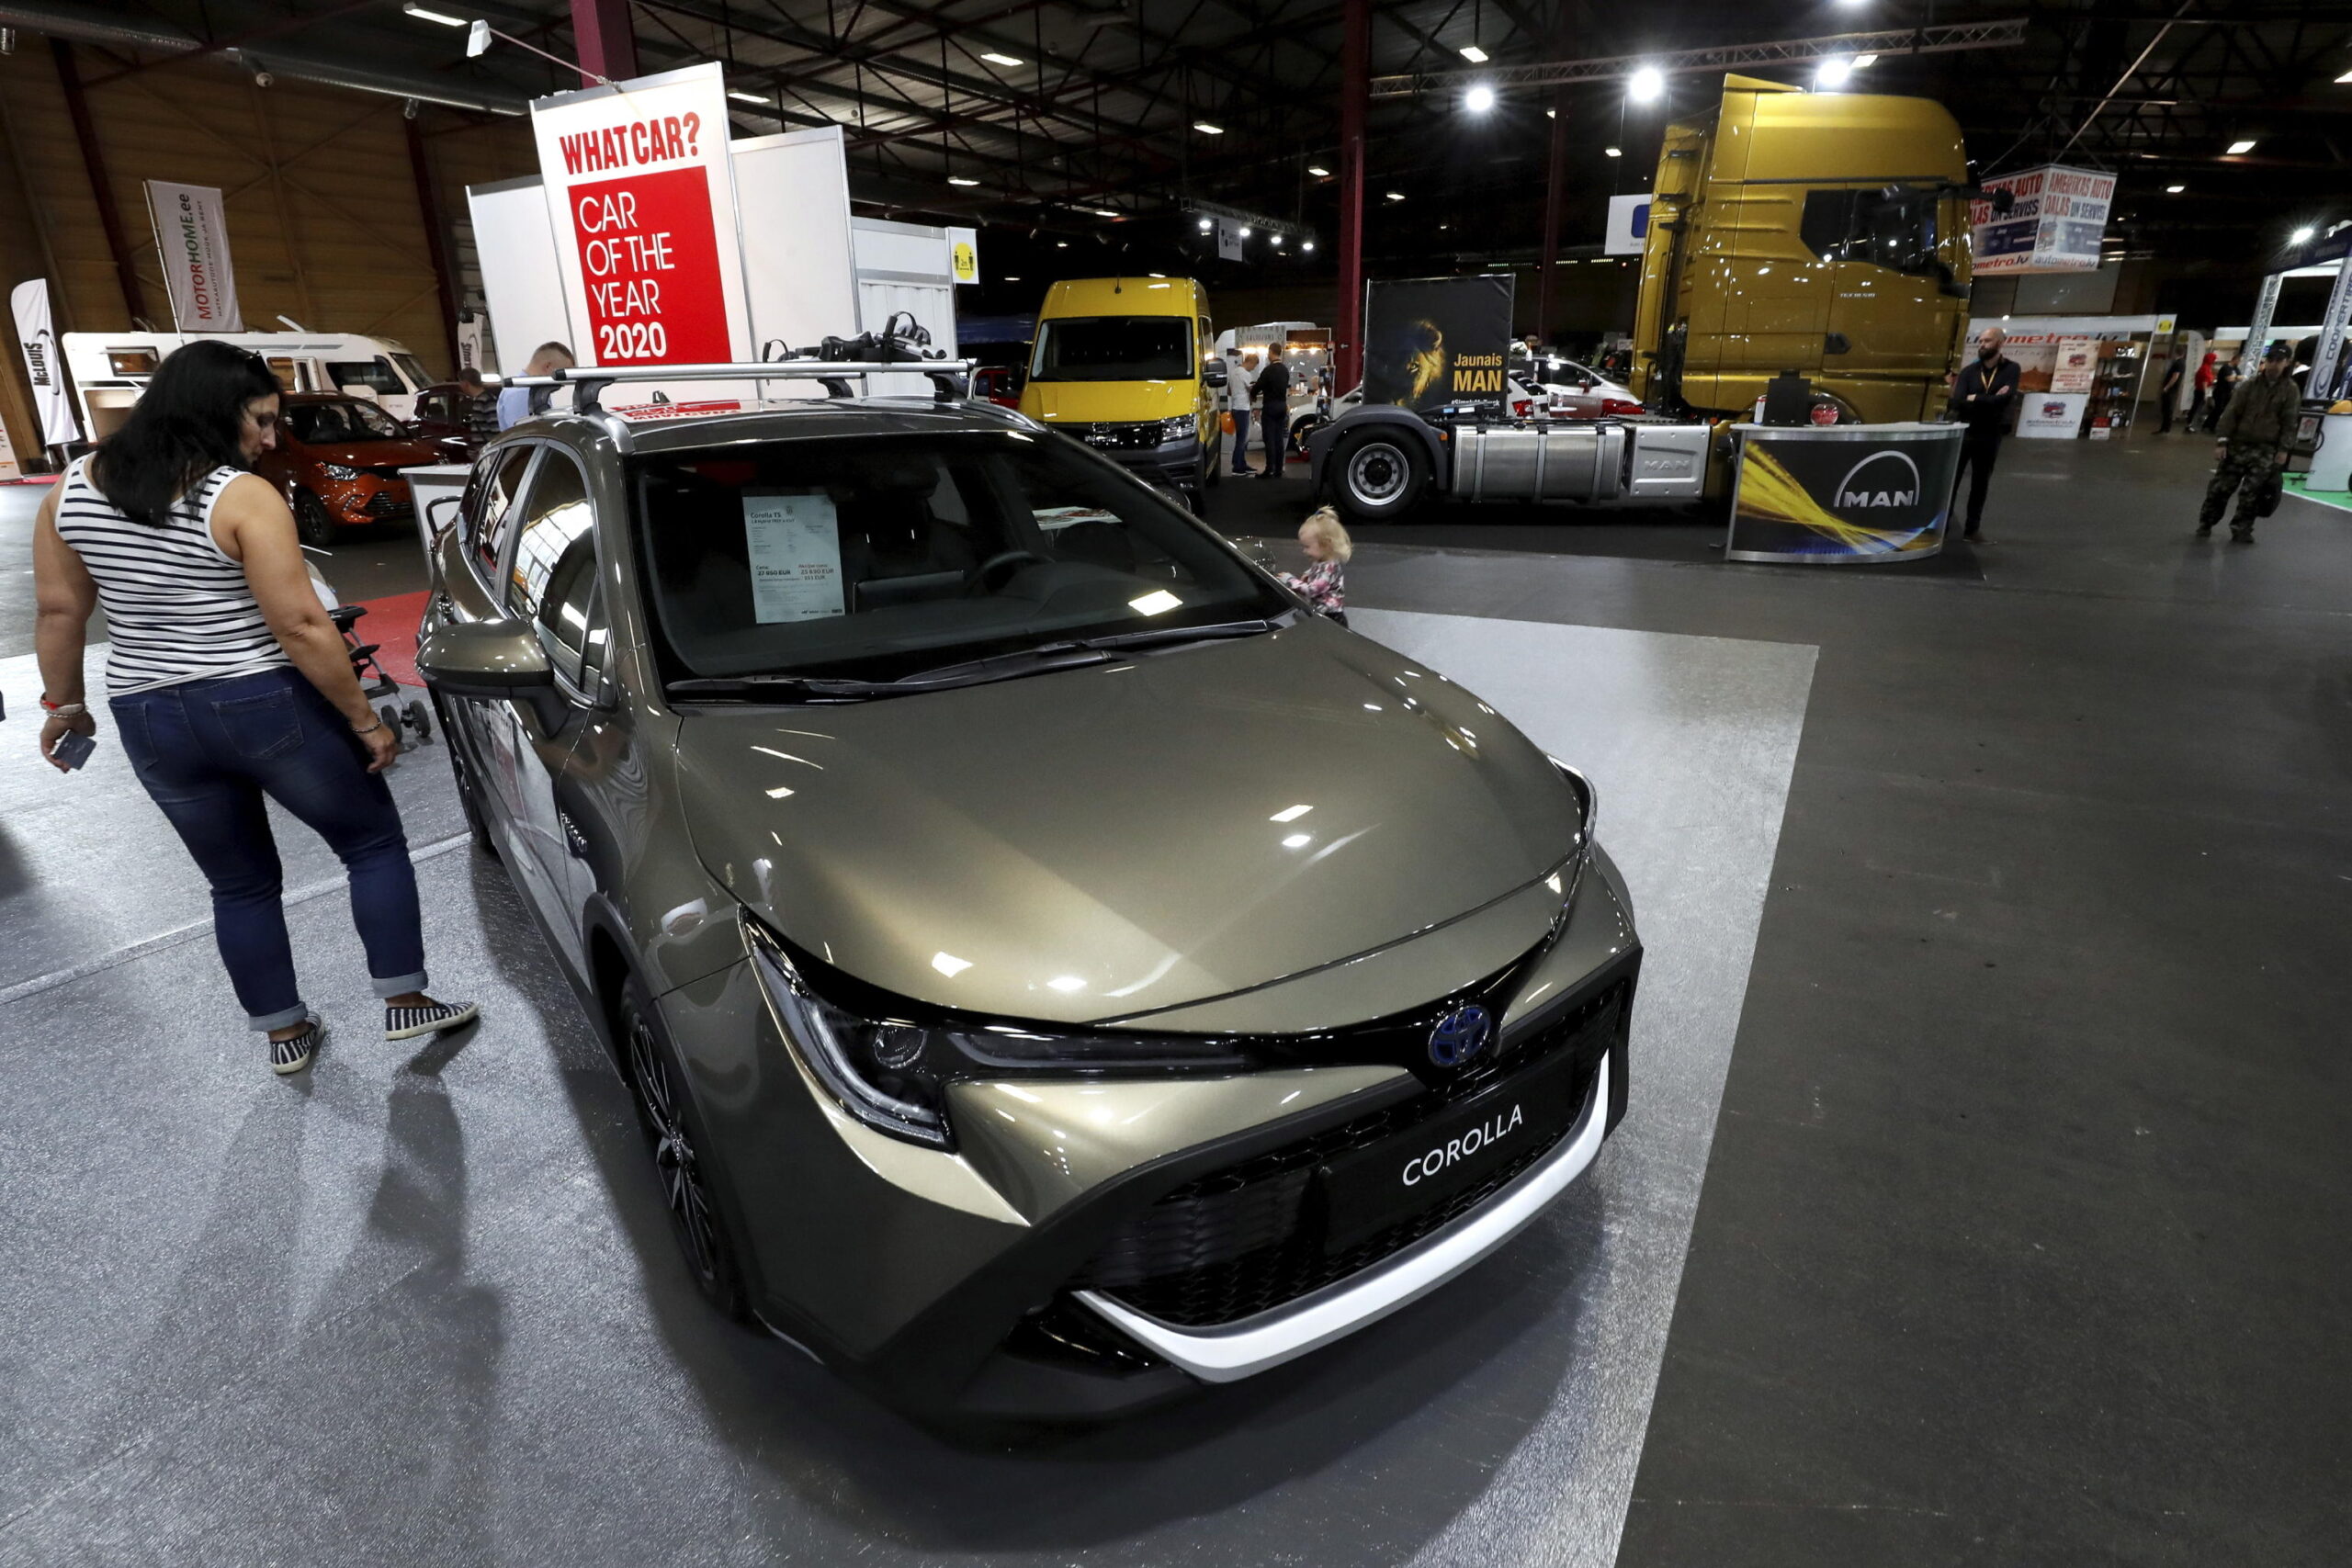 epa08696671 A visitor looks at a Toyota Corolla car during the International Motor Show Auto 2020, in Riga, Latvia, 25 September 2020. The automotive industry event is the biggest in the Baltic countries and runs from 25 to 27 September.  EPA/Toms Kalnins